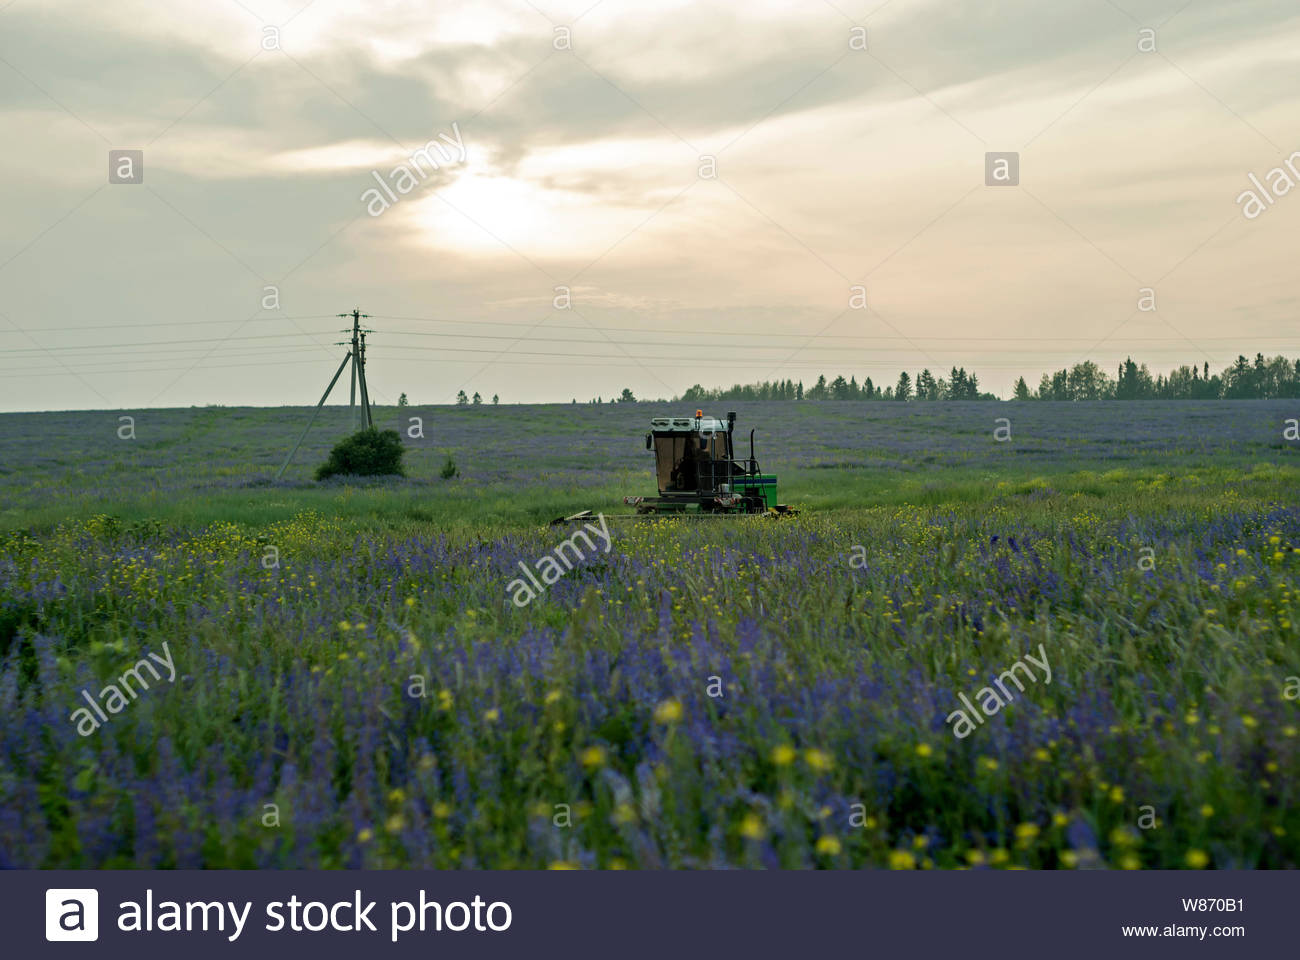 Pastoral Landscape With A Flowering Meadow And Machine For